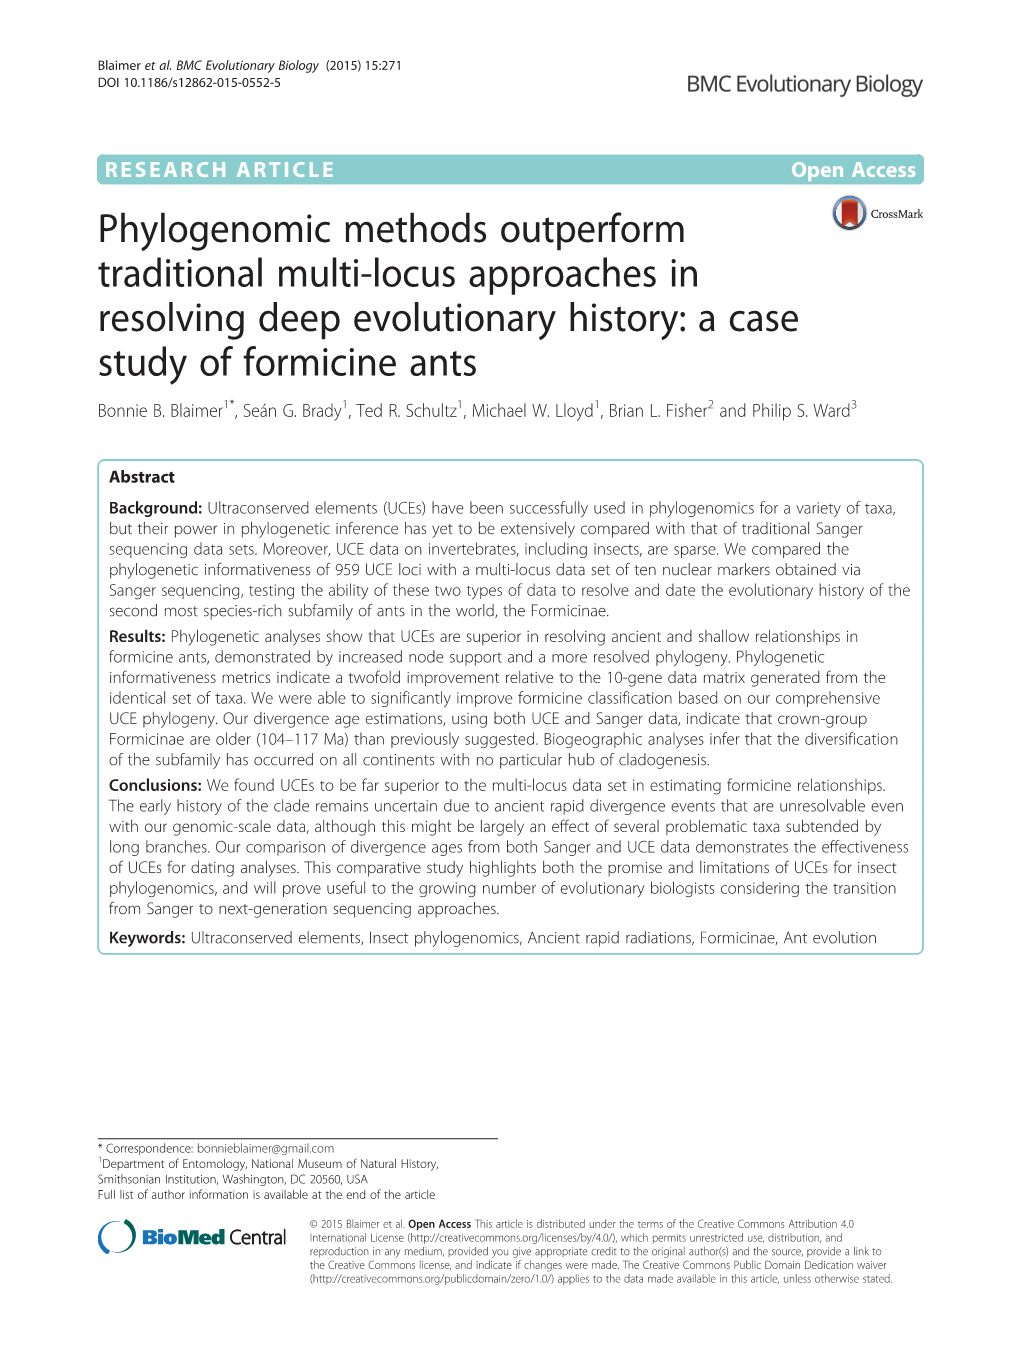 Phylogenomic Methods Outperform Traditional Multi-Locus Approaches in Resolving Deep Evolutionary History: a Case Study of Formicine Ants Bonnie B